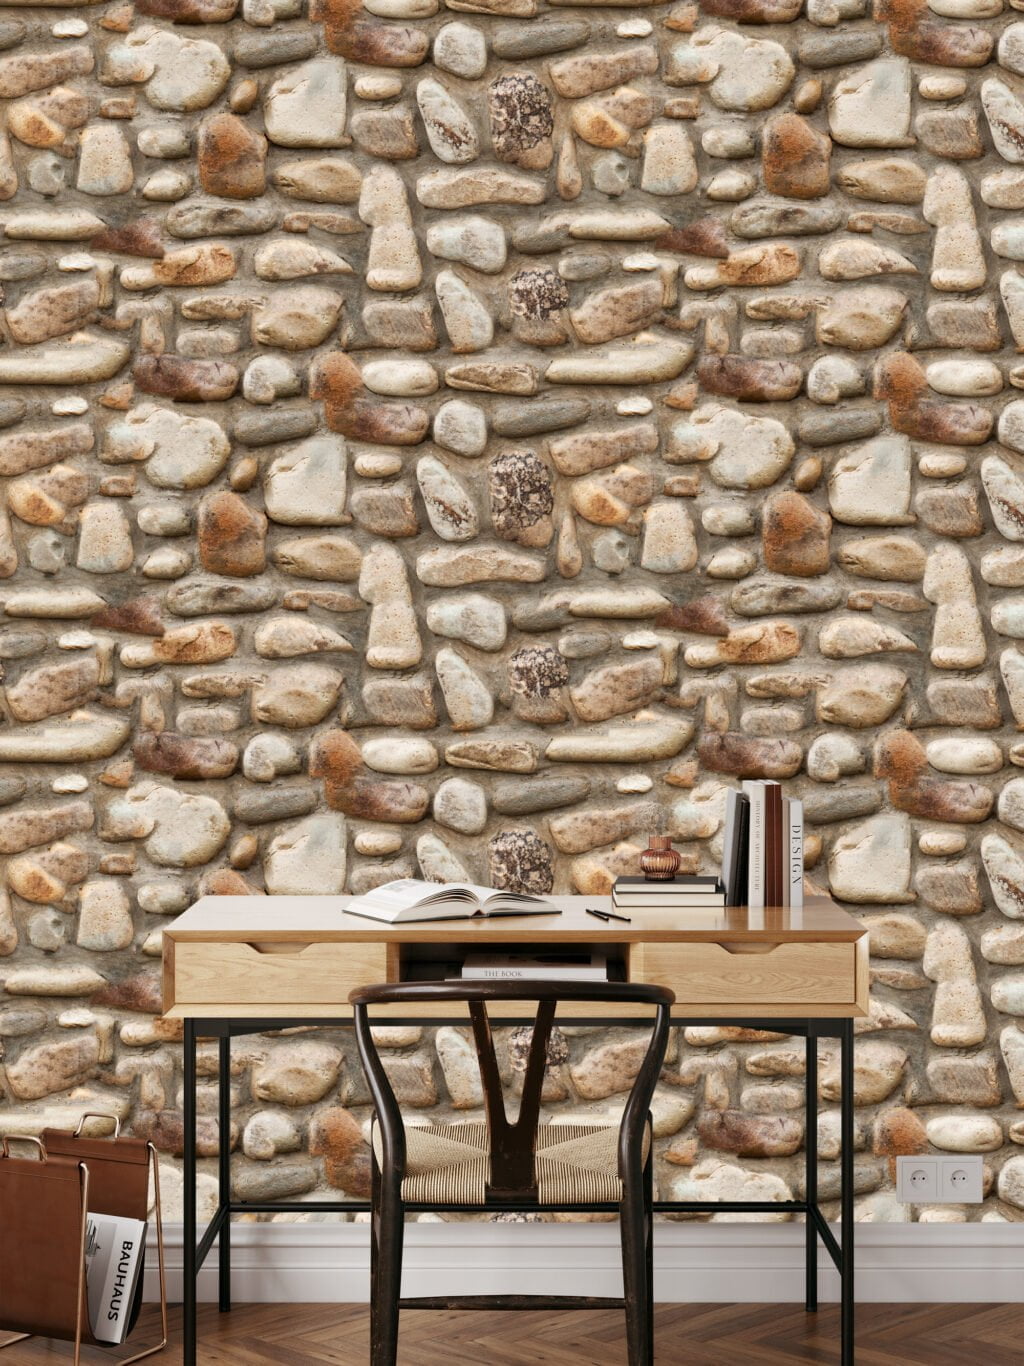 Earth Tones Large Stone Wall Wallpaper, Nature Inspired Faux Decor Peel & Stick Wall Mural